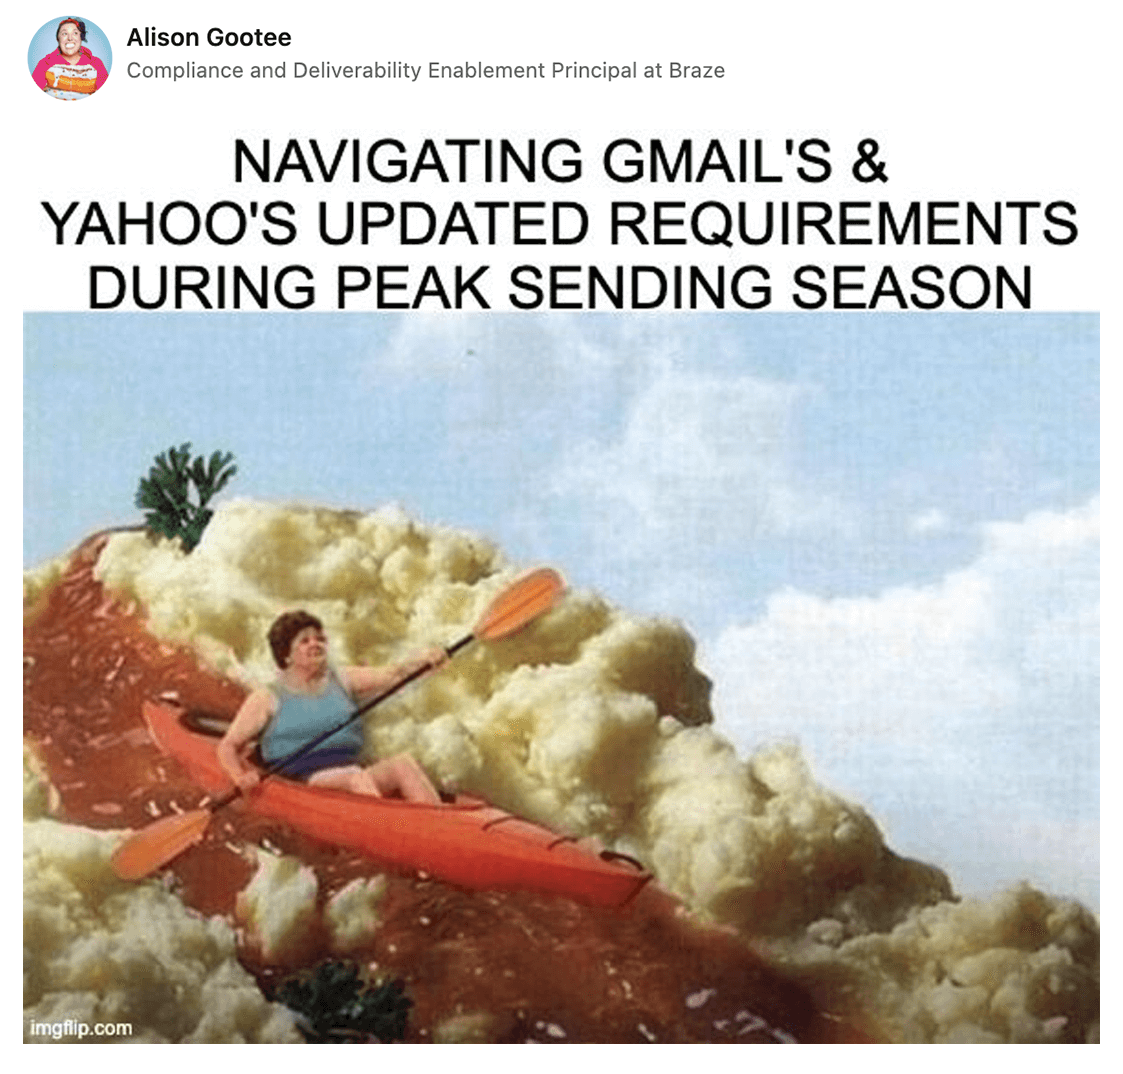 Alison Gootee on LinkedIn with a meme that says 'Navigating Gmail's & Yahoo's updated requirements during peak sending season'